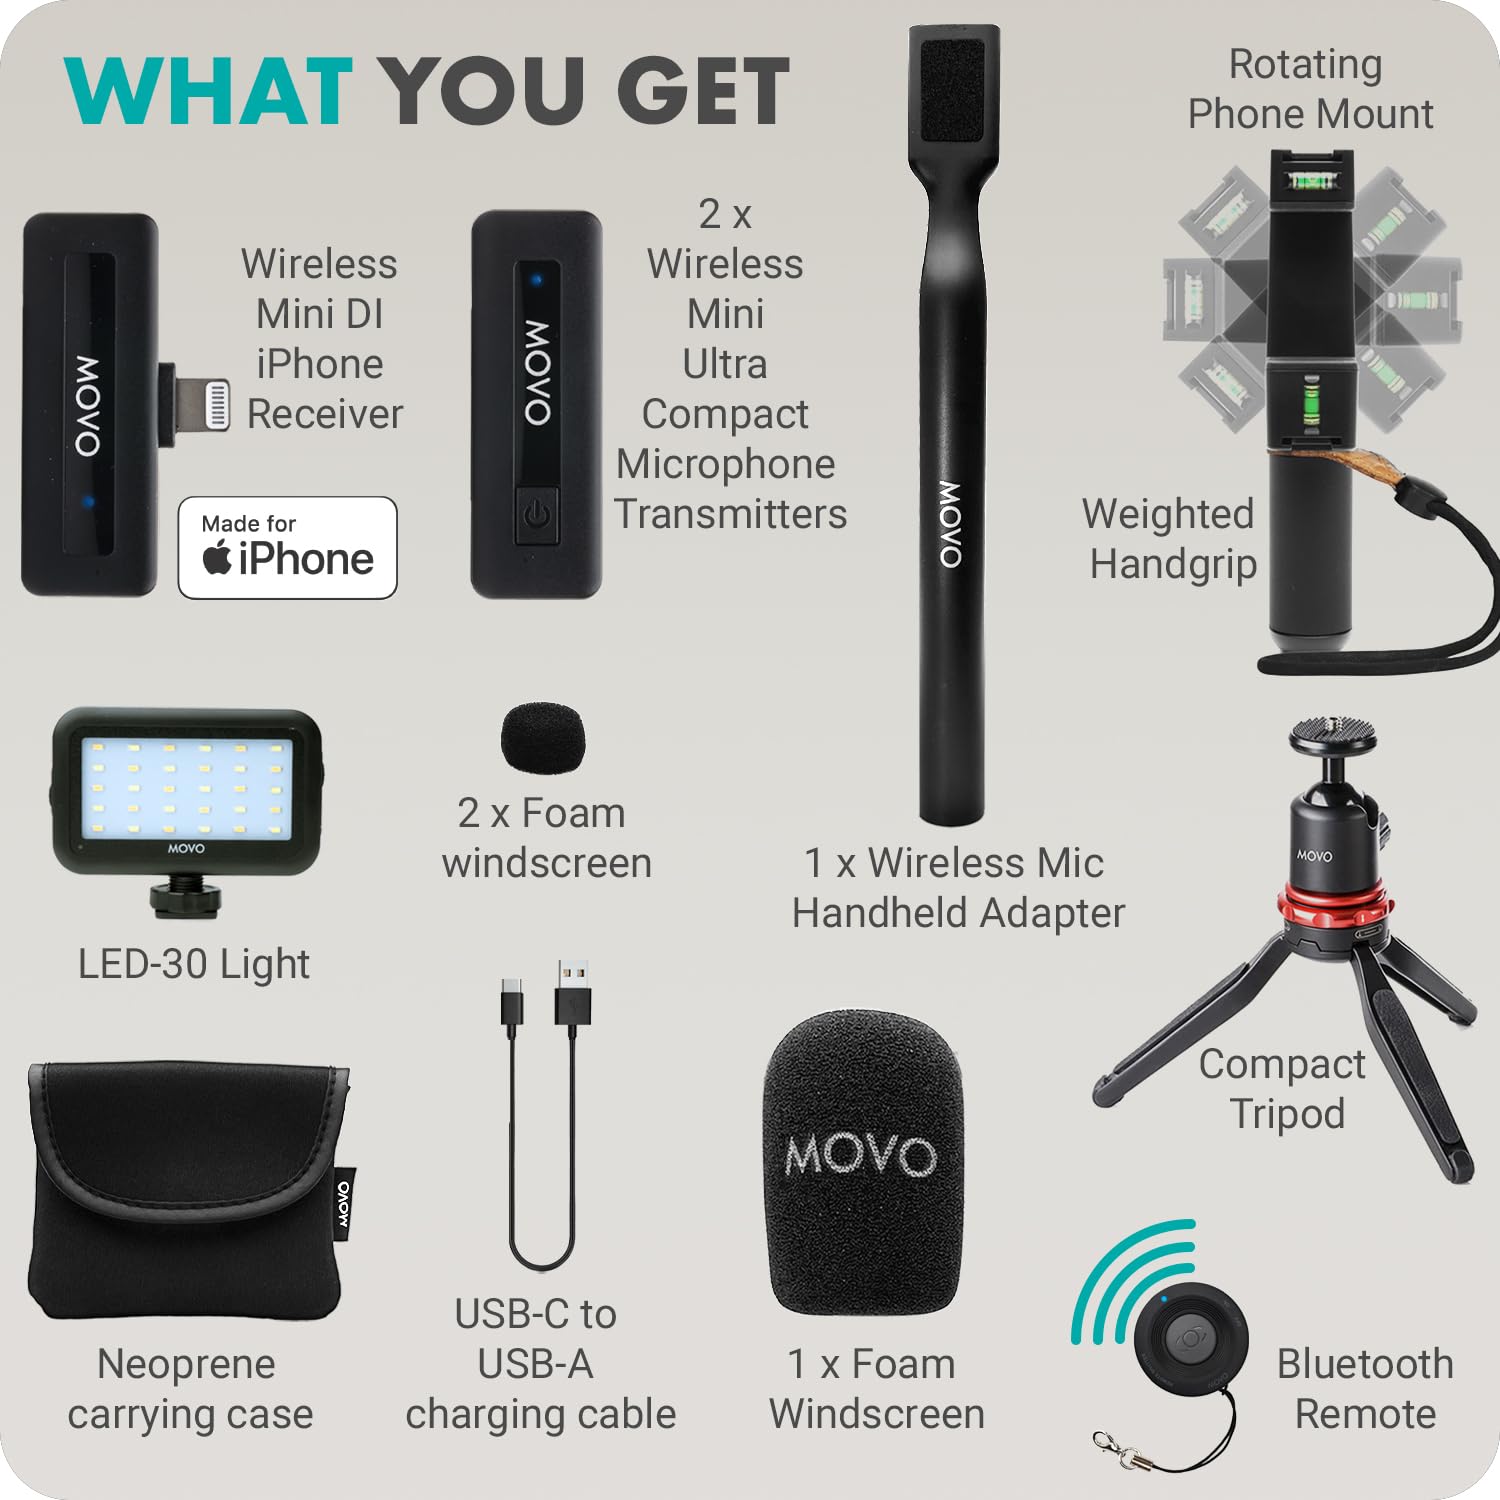 Movo iVlogger Wireless Vlogging Kit for iPhone with Dual Wireless Lavalier Microphone, Tripod, Phone Mount, LED Light, Bluetooth Remote, and WHX-HM Mic Handle - Wireless Youtube Starter Kit for iPhone  - Very Good